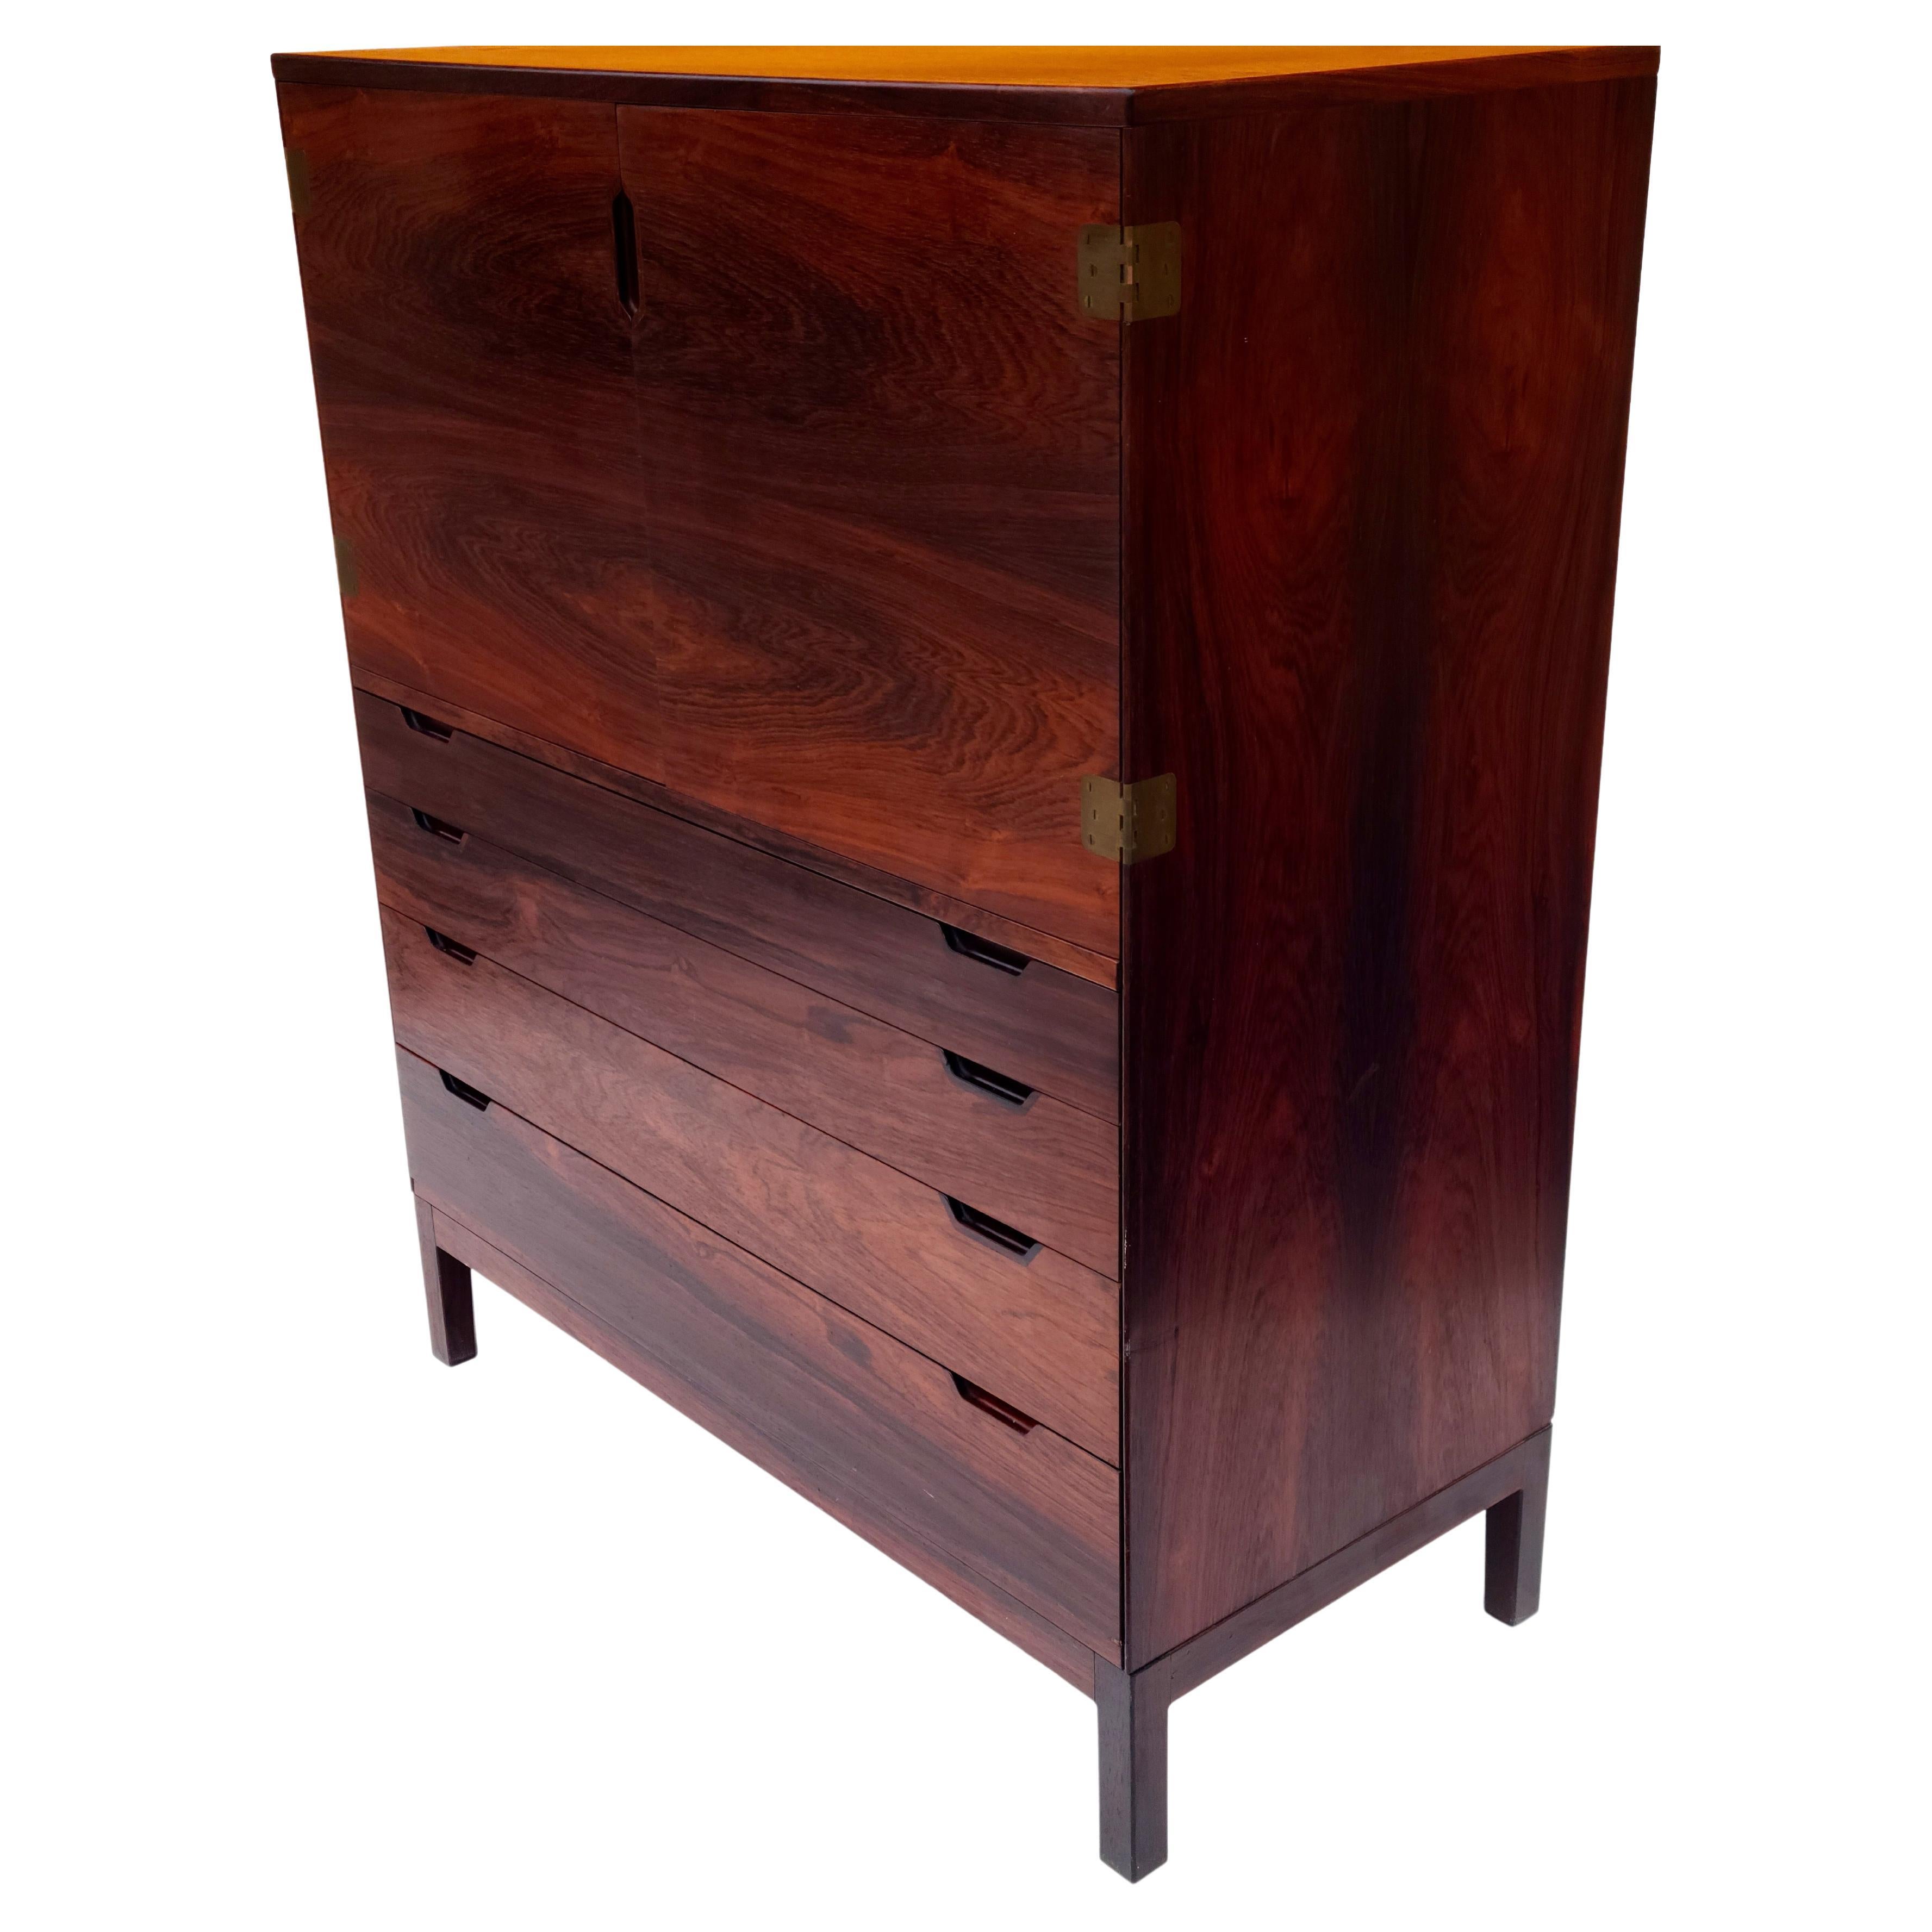 Please feel free to reach out for accurate shipping quote to your location.

Rosewood Gentleman's chest designed by Svend Langkilde.
Made in Denmark by Langkilde Mobler.